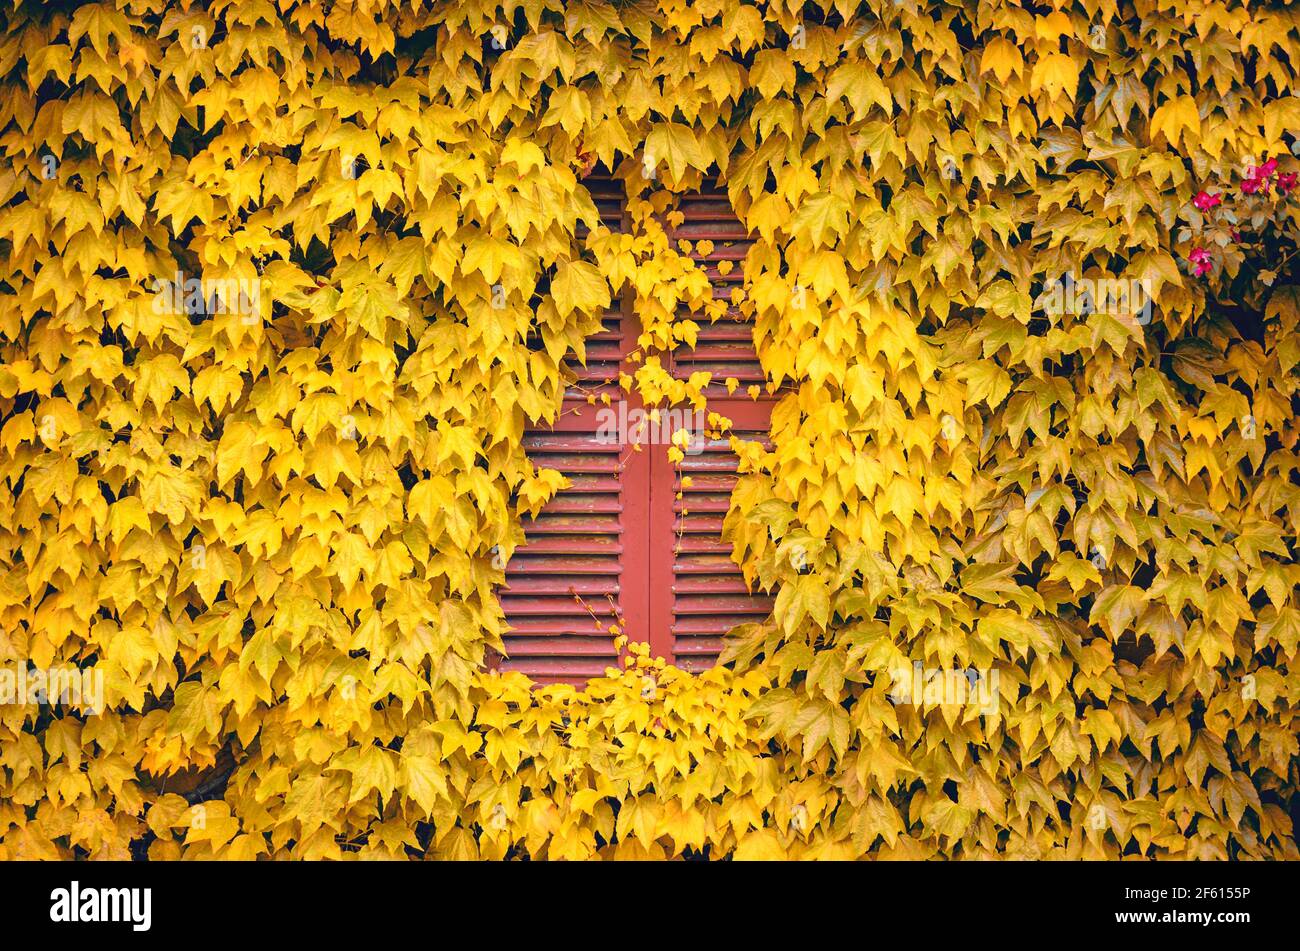 Wall with a closed window with red shutters covered and surrounded by yellow ivy leaves Stock Photo